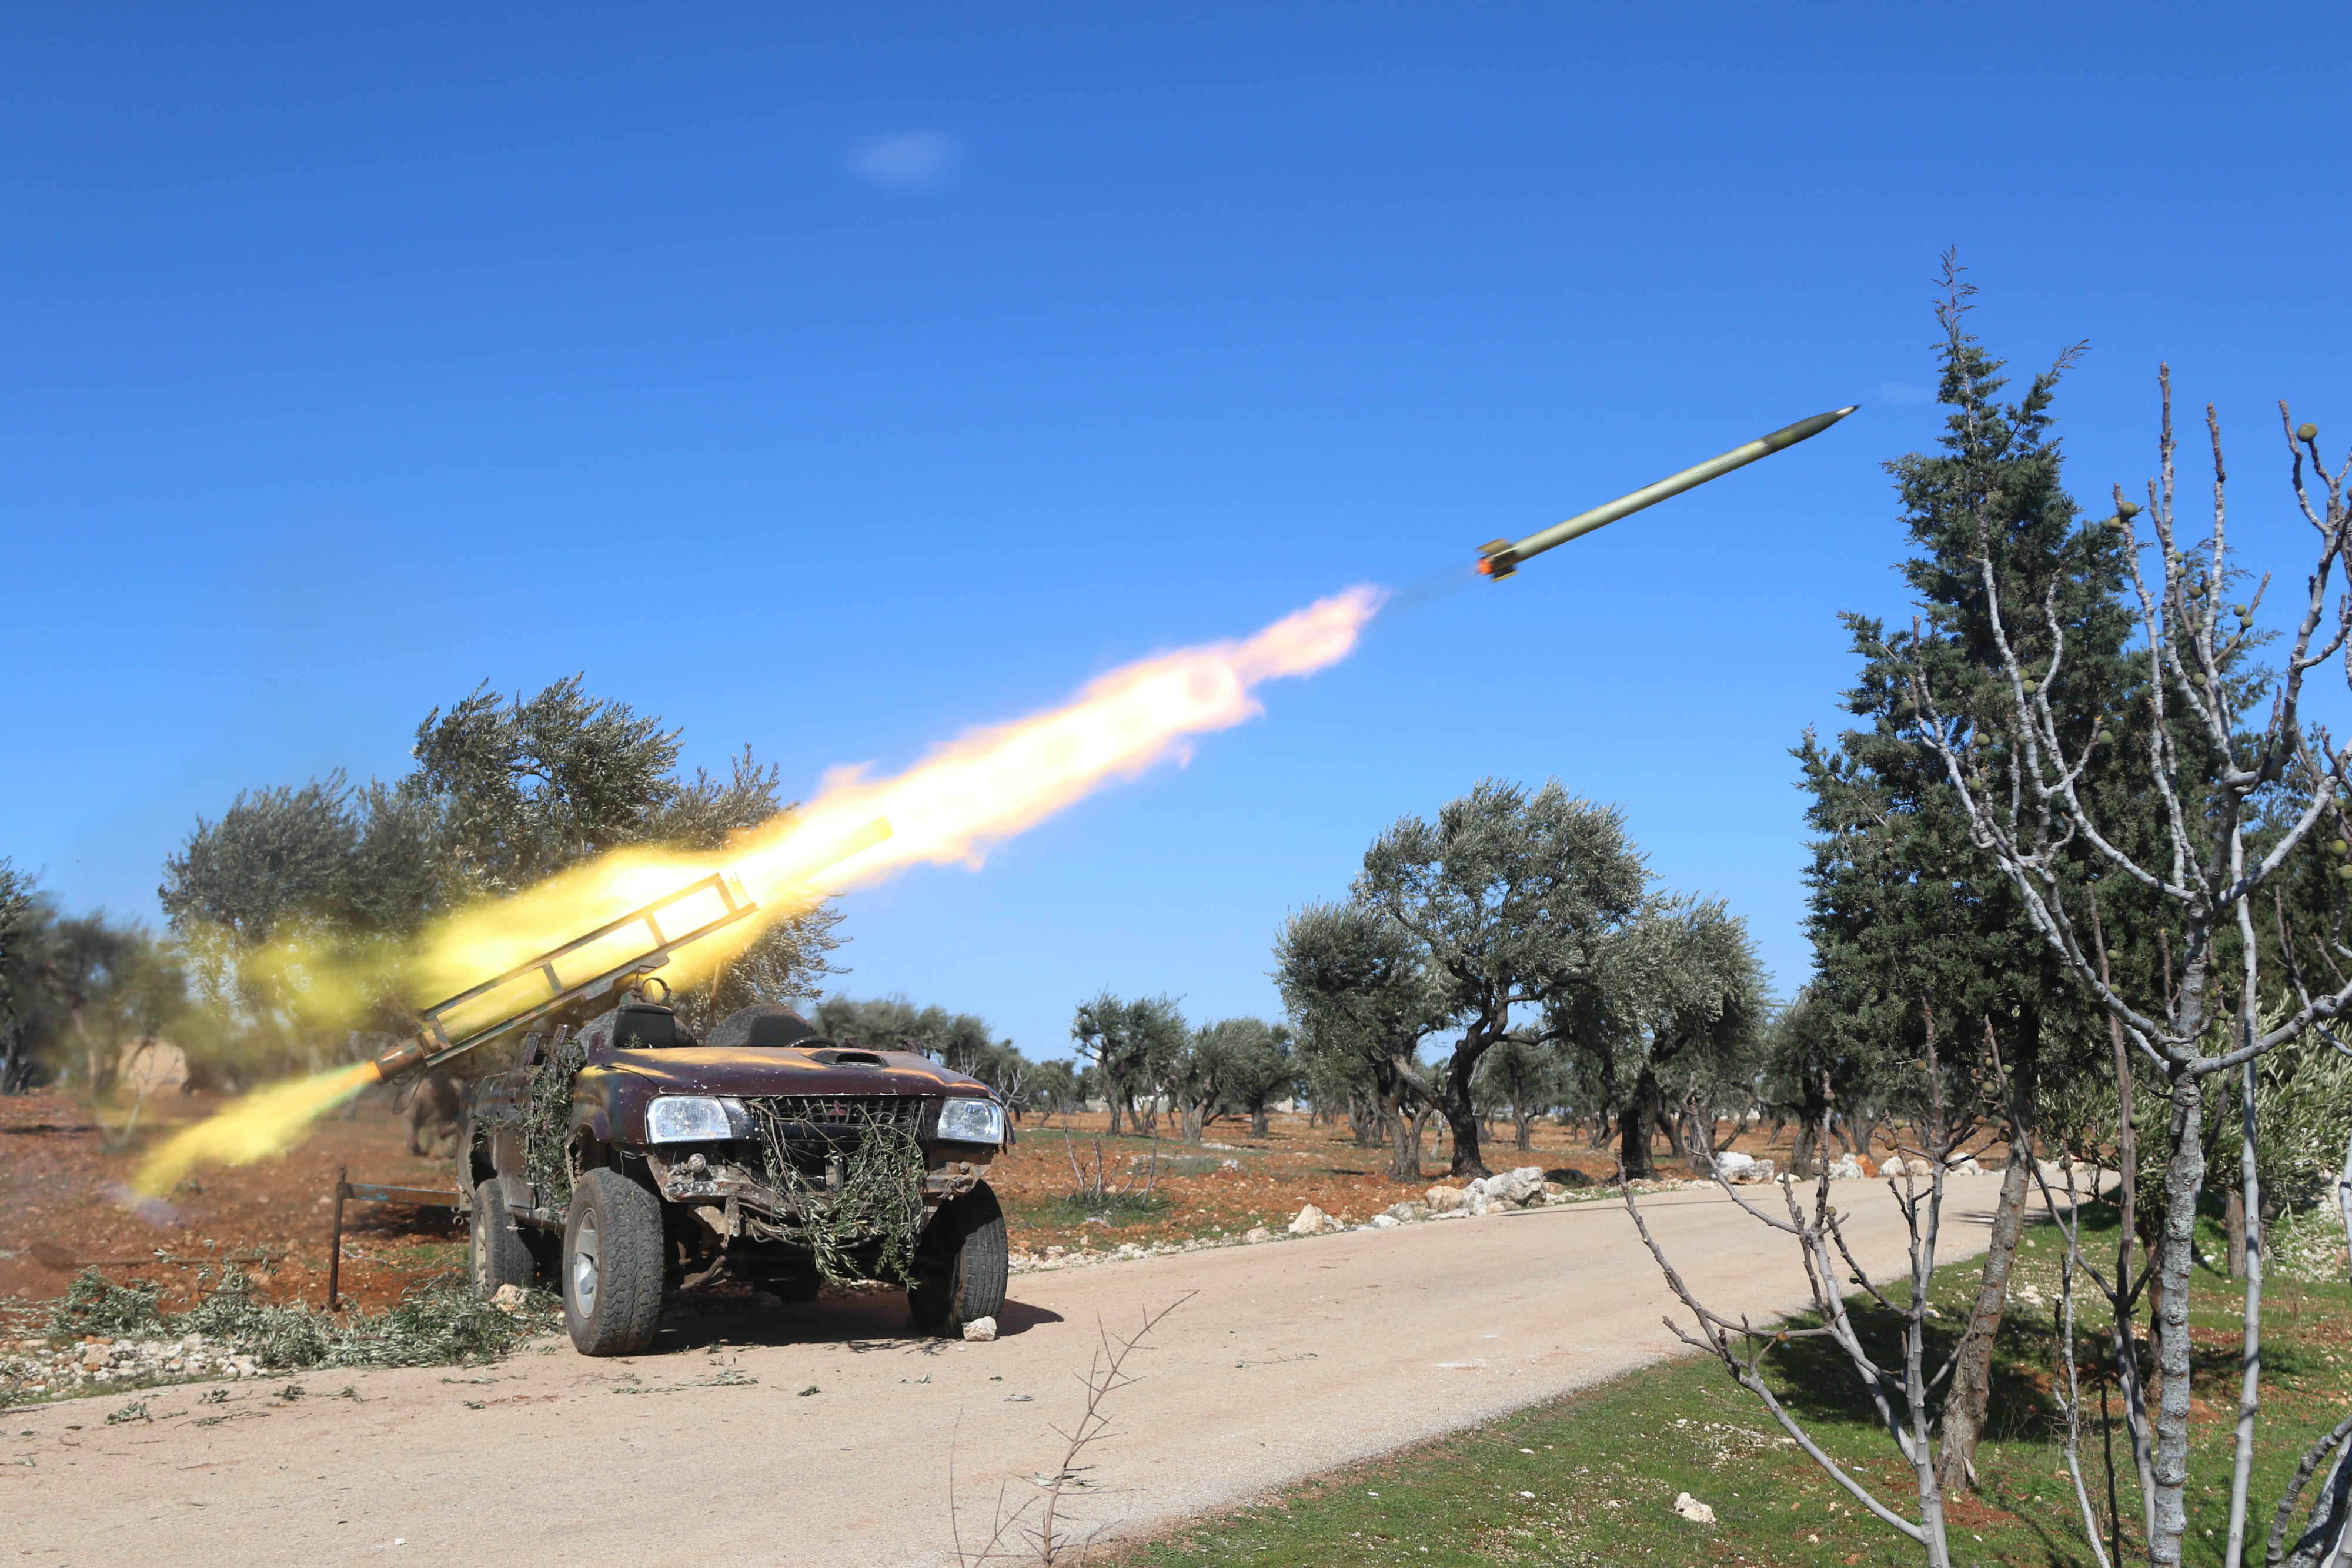 Rebels launch a Grad rocket at Syrian government positions in Talhia village in Syria's Idlib province (MEE/Abdulwajed Haj Esteifi)